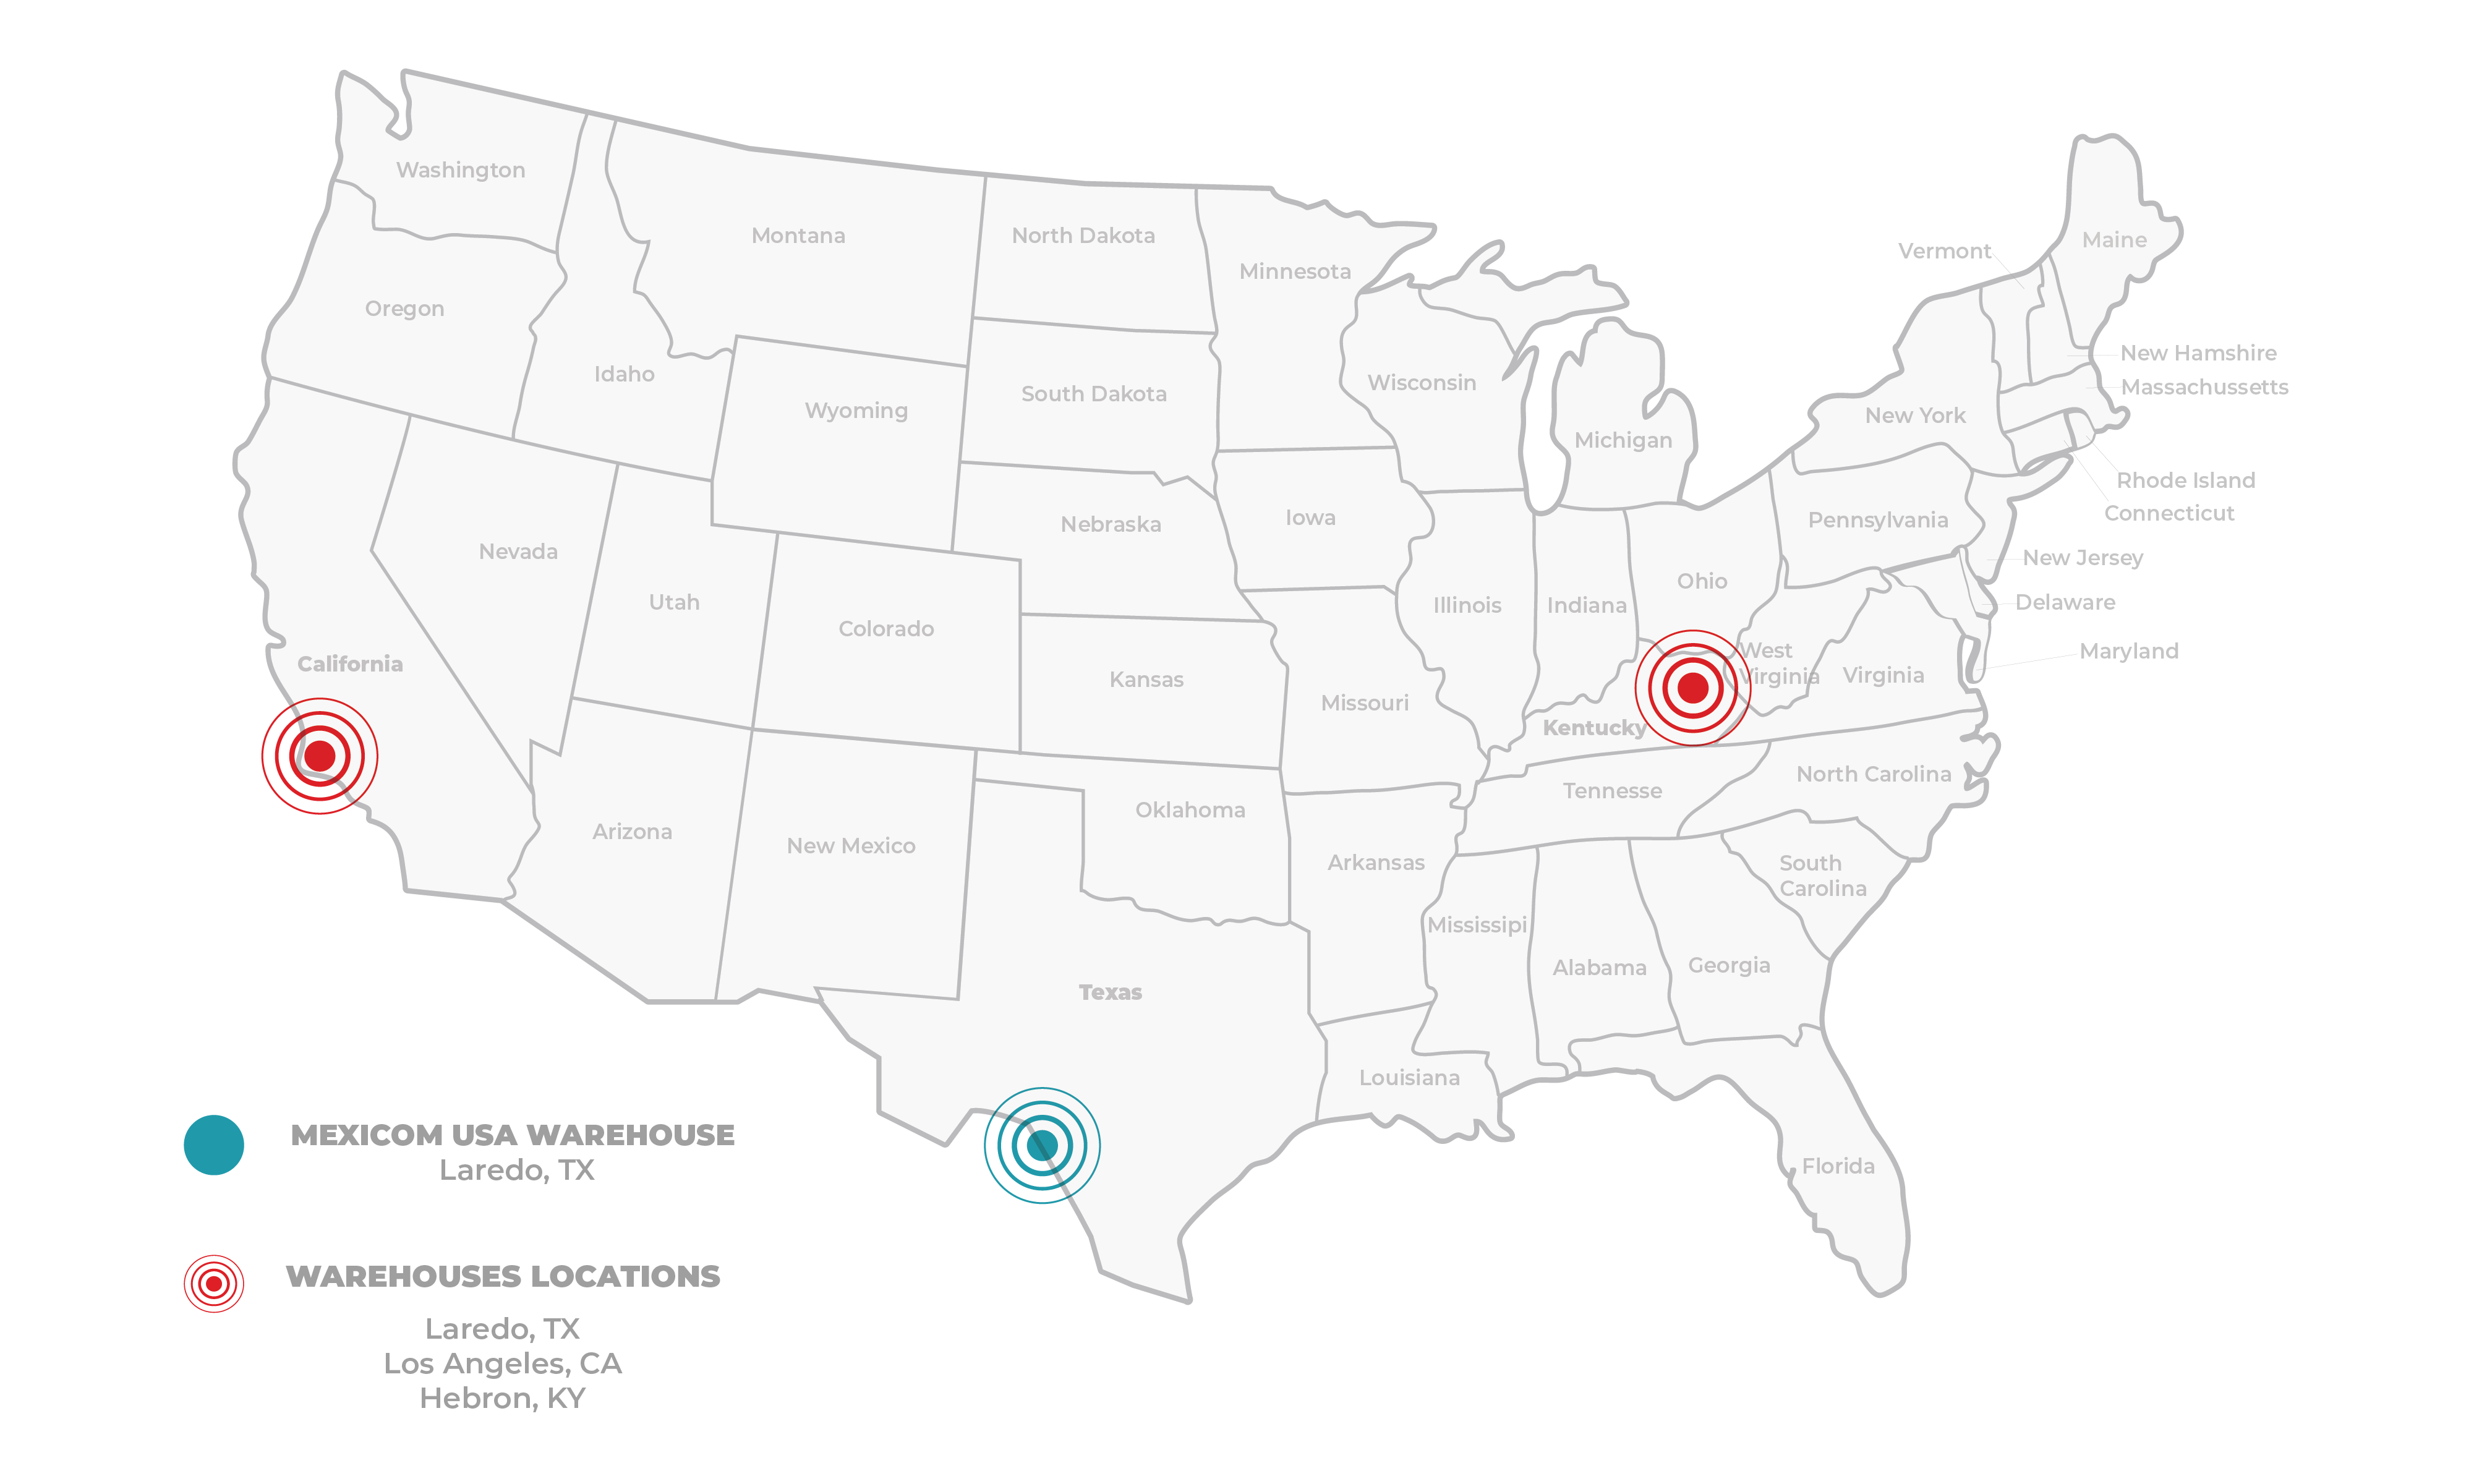 Warehouse locations in the United States for Mexicom USA